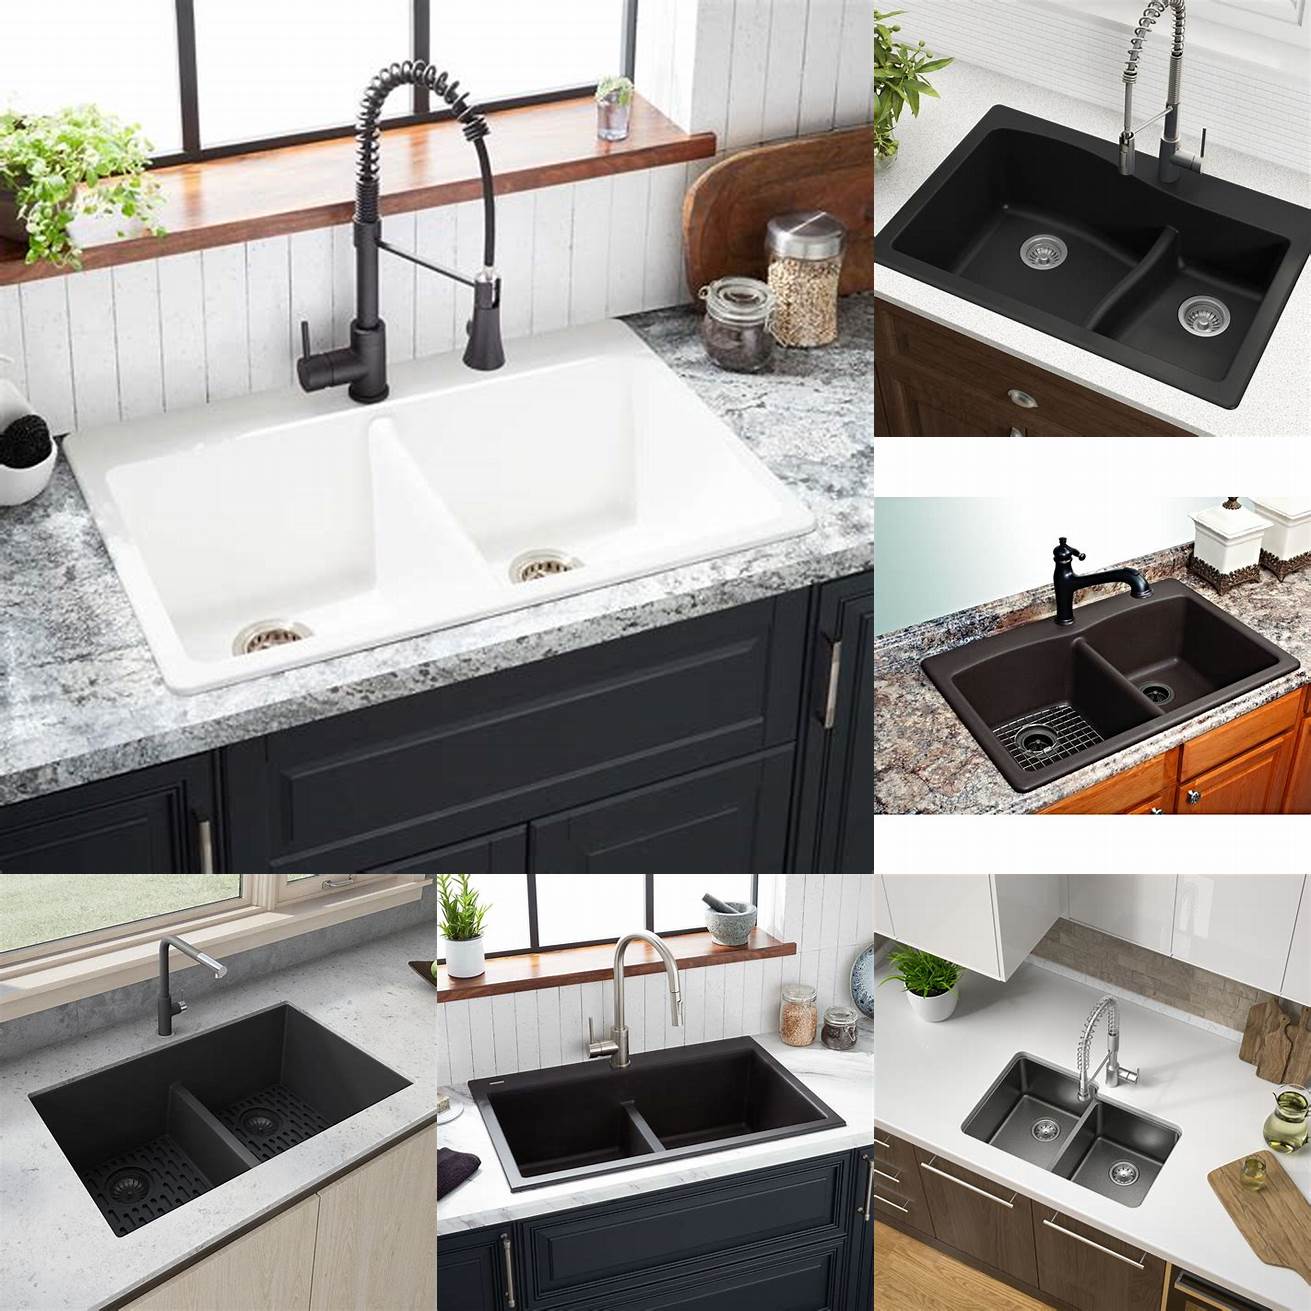 Image of a composite kitchen sink in a double-bowl style